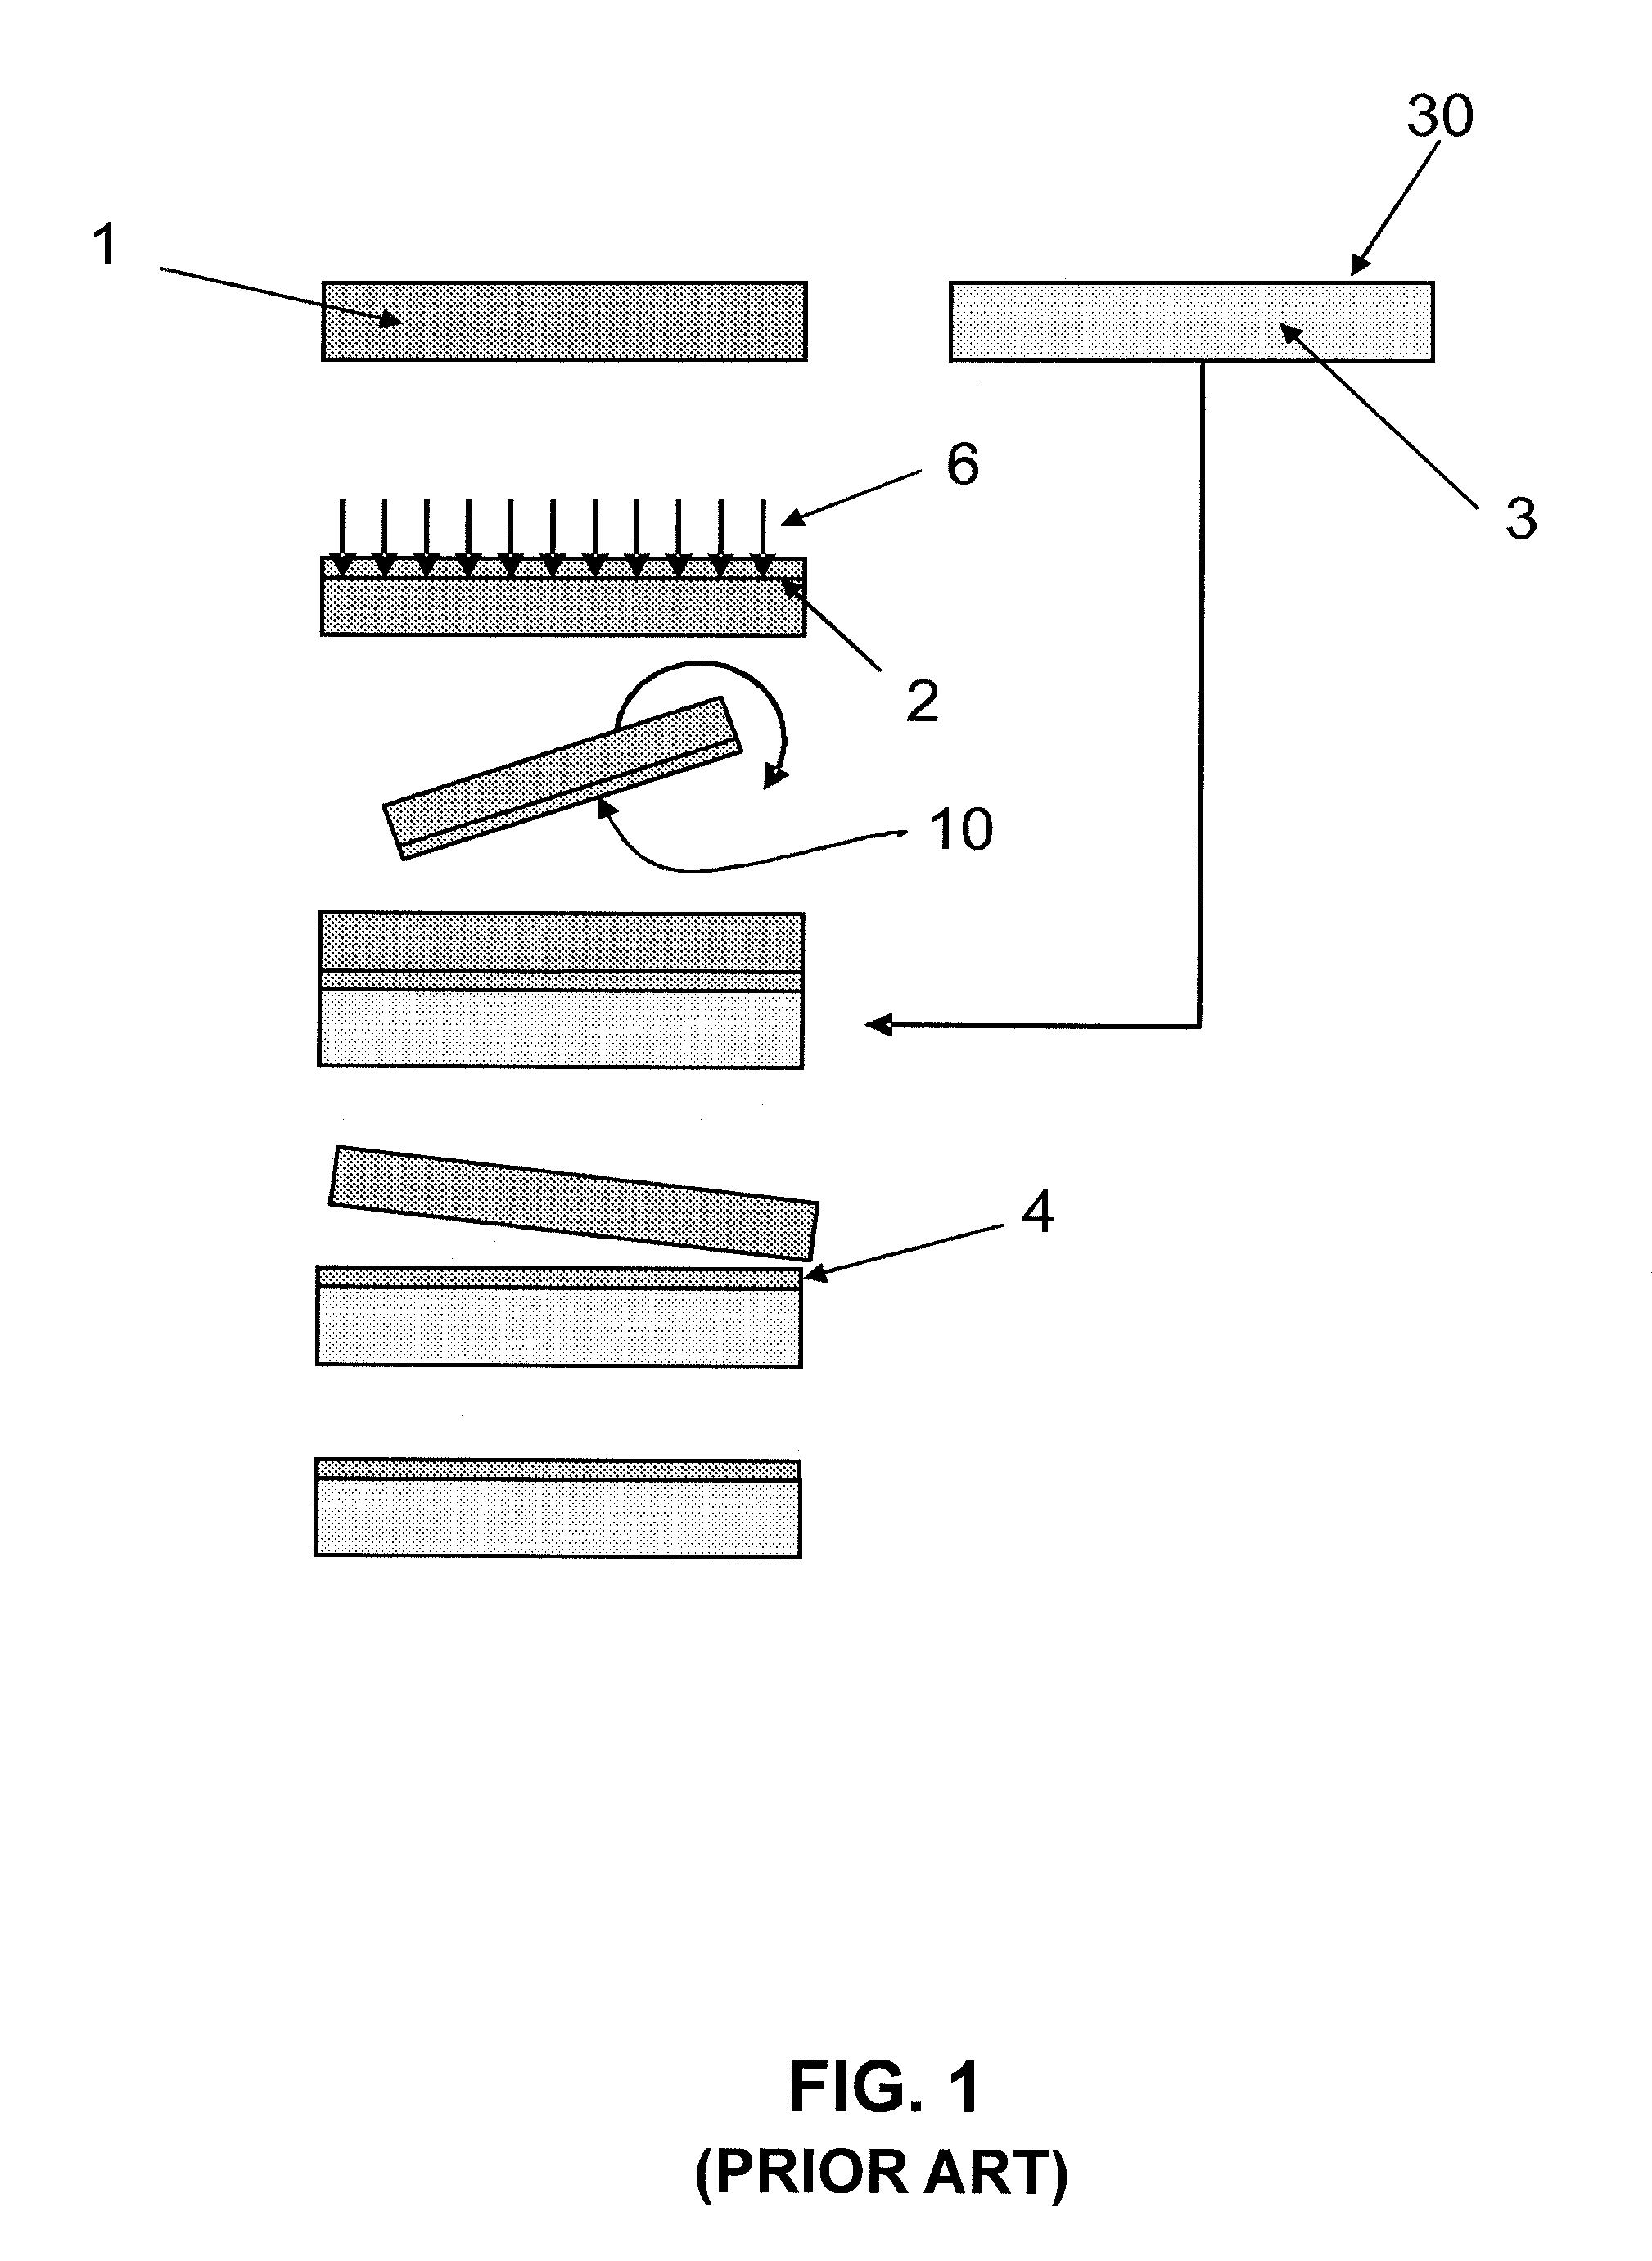 Method for reducing irregularities at the surface of a layer transferred from a source substrate to a glass-based support substrate